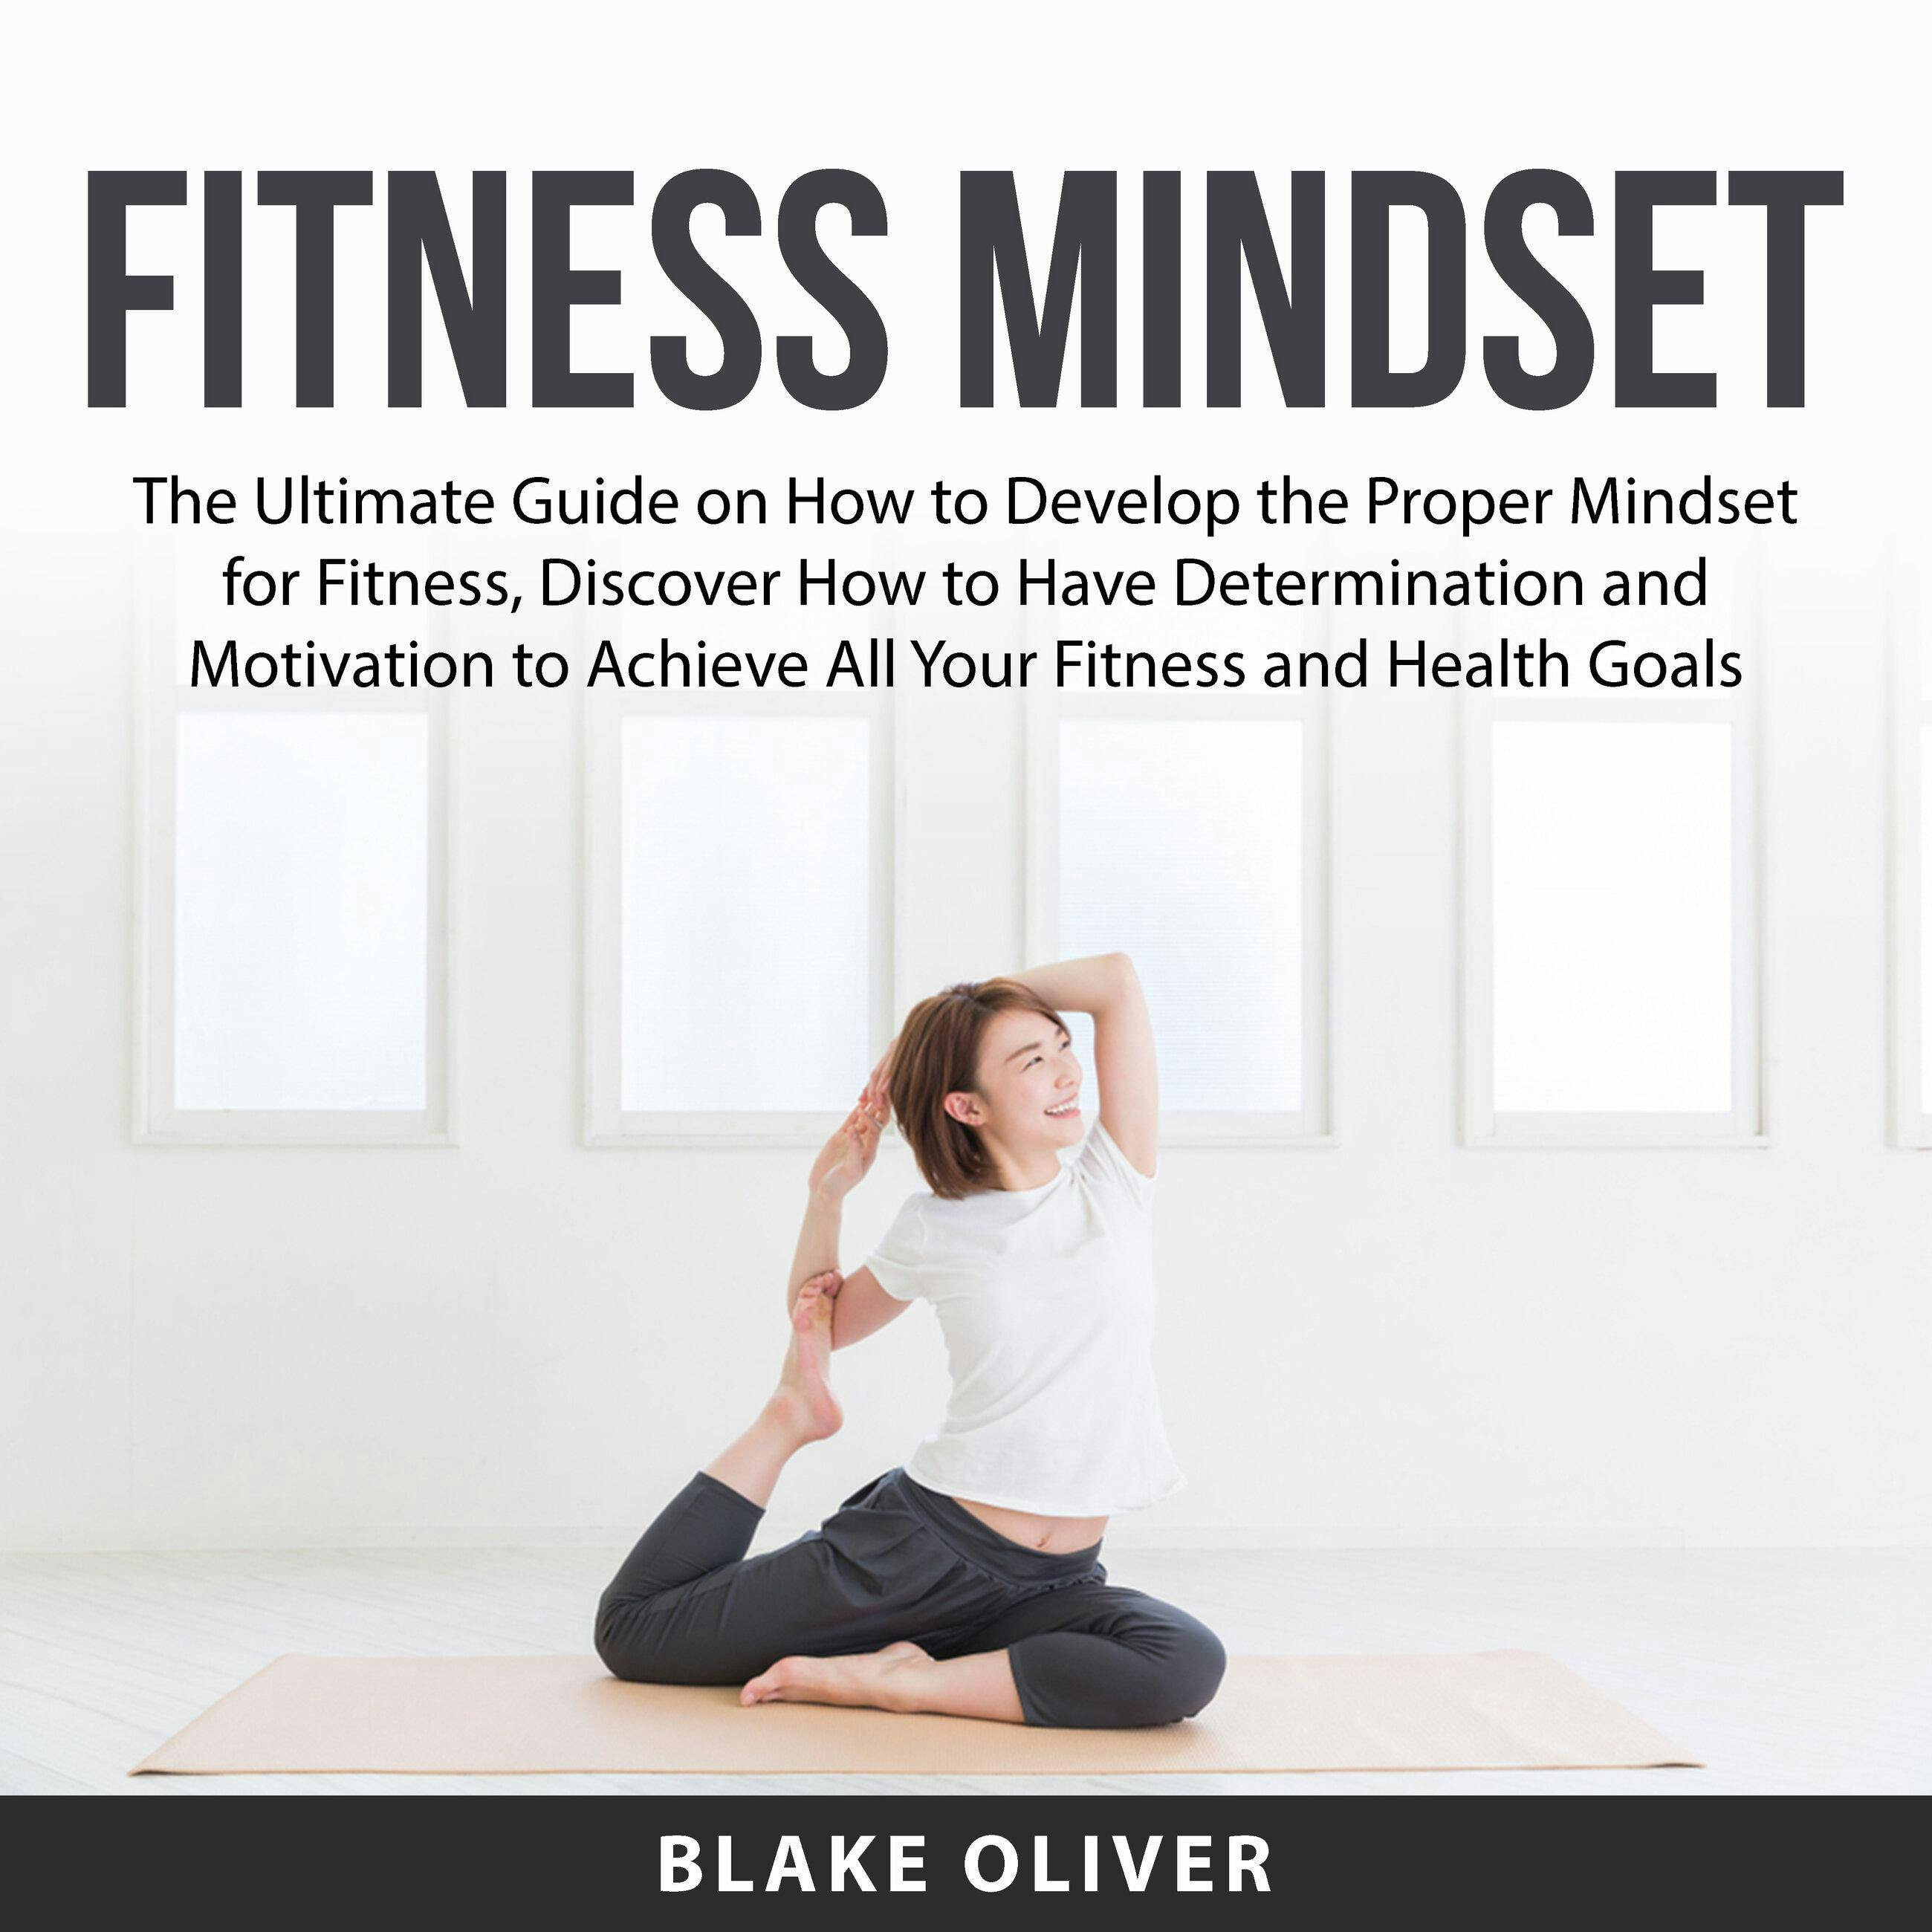 Fitness Mindset: The Ultimate Guide on How to Develop the Proper Mindset for Fitness, Discover How to Have Determination and Motivation to Achieve All Your Fitness and Health Goals - undefined